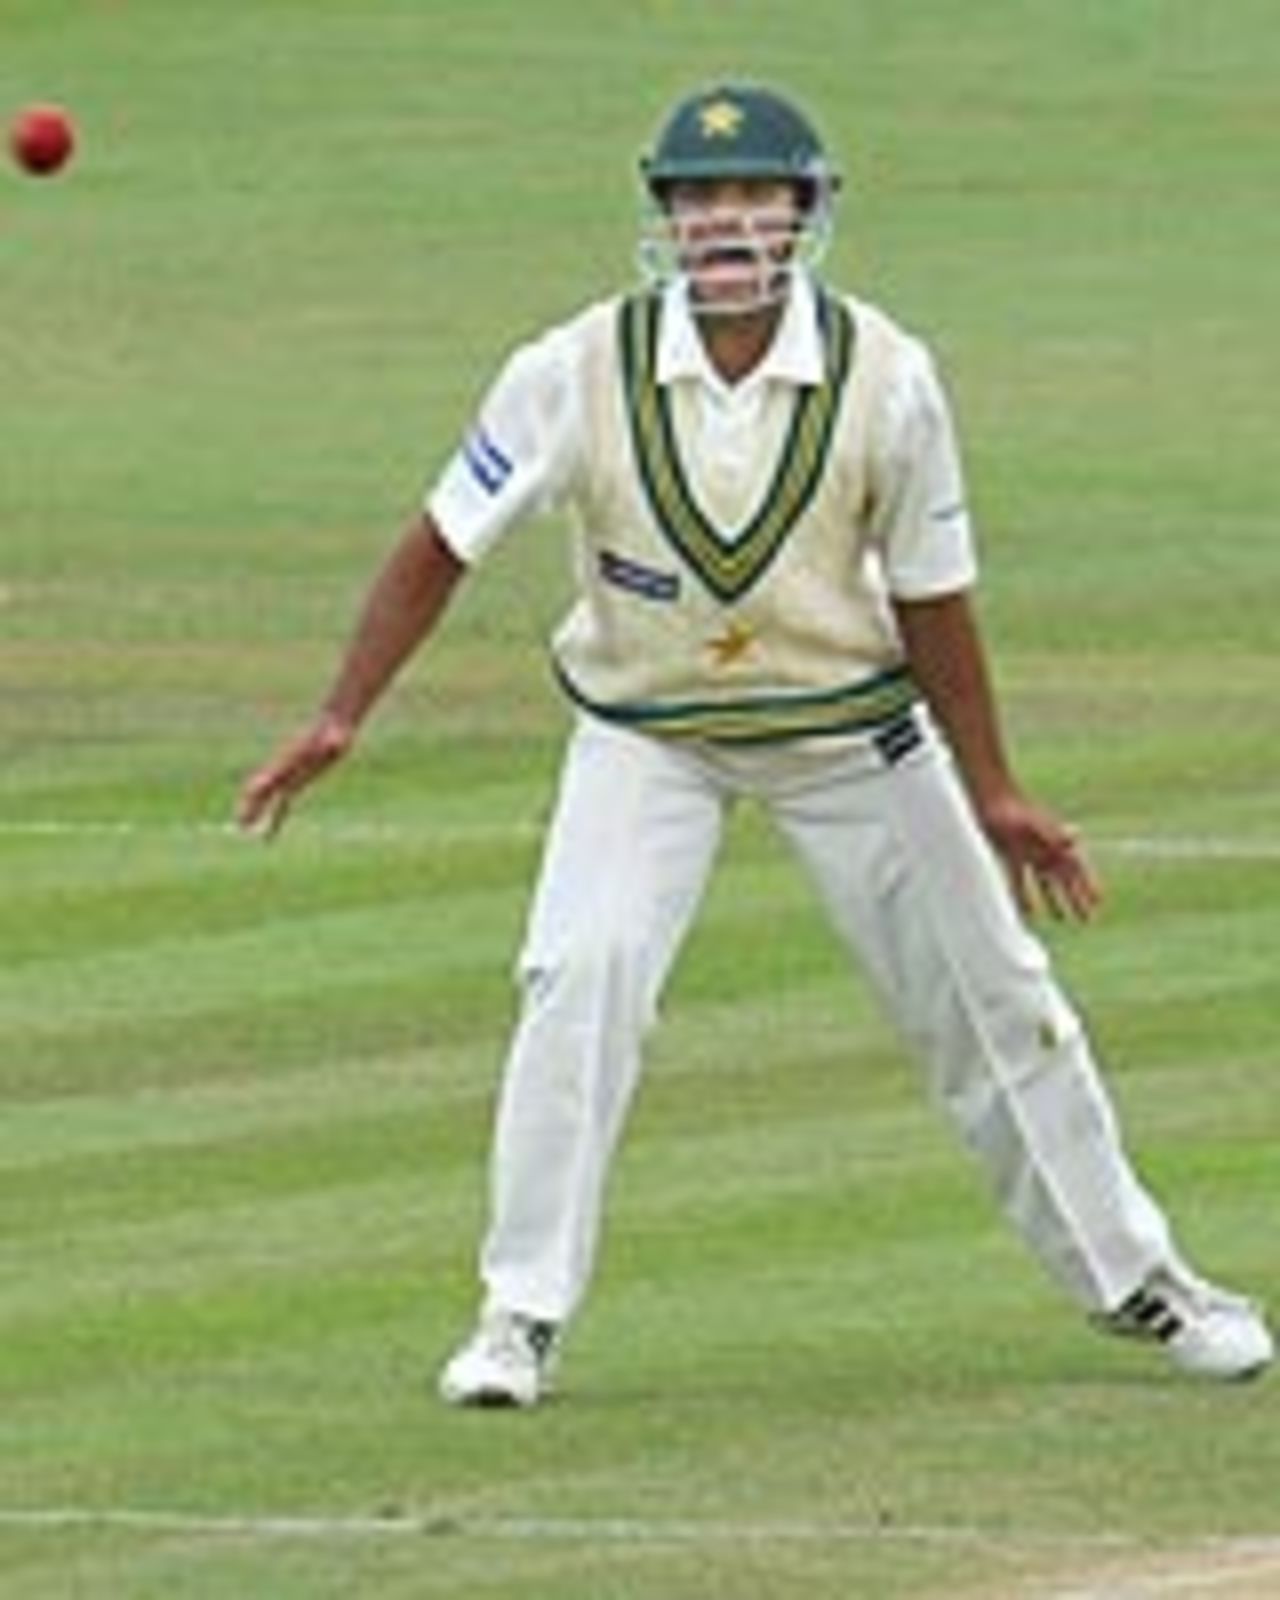 A wide-eyed Imran Farhat in a close-in position watches the ball, New Zealand v Pakistan, 1st Test, Hamilton, 5th day, December 23, 2003